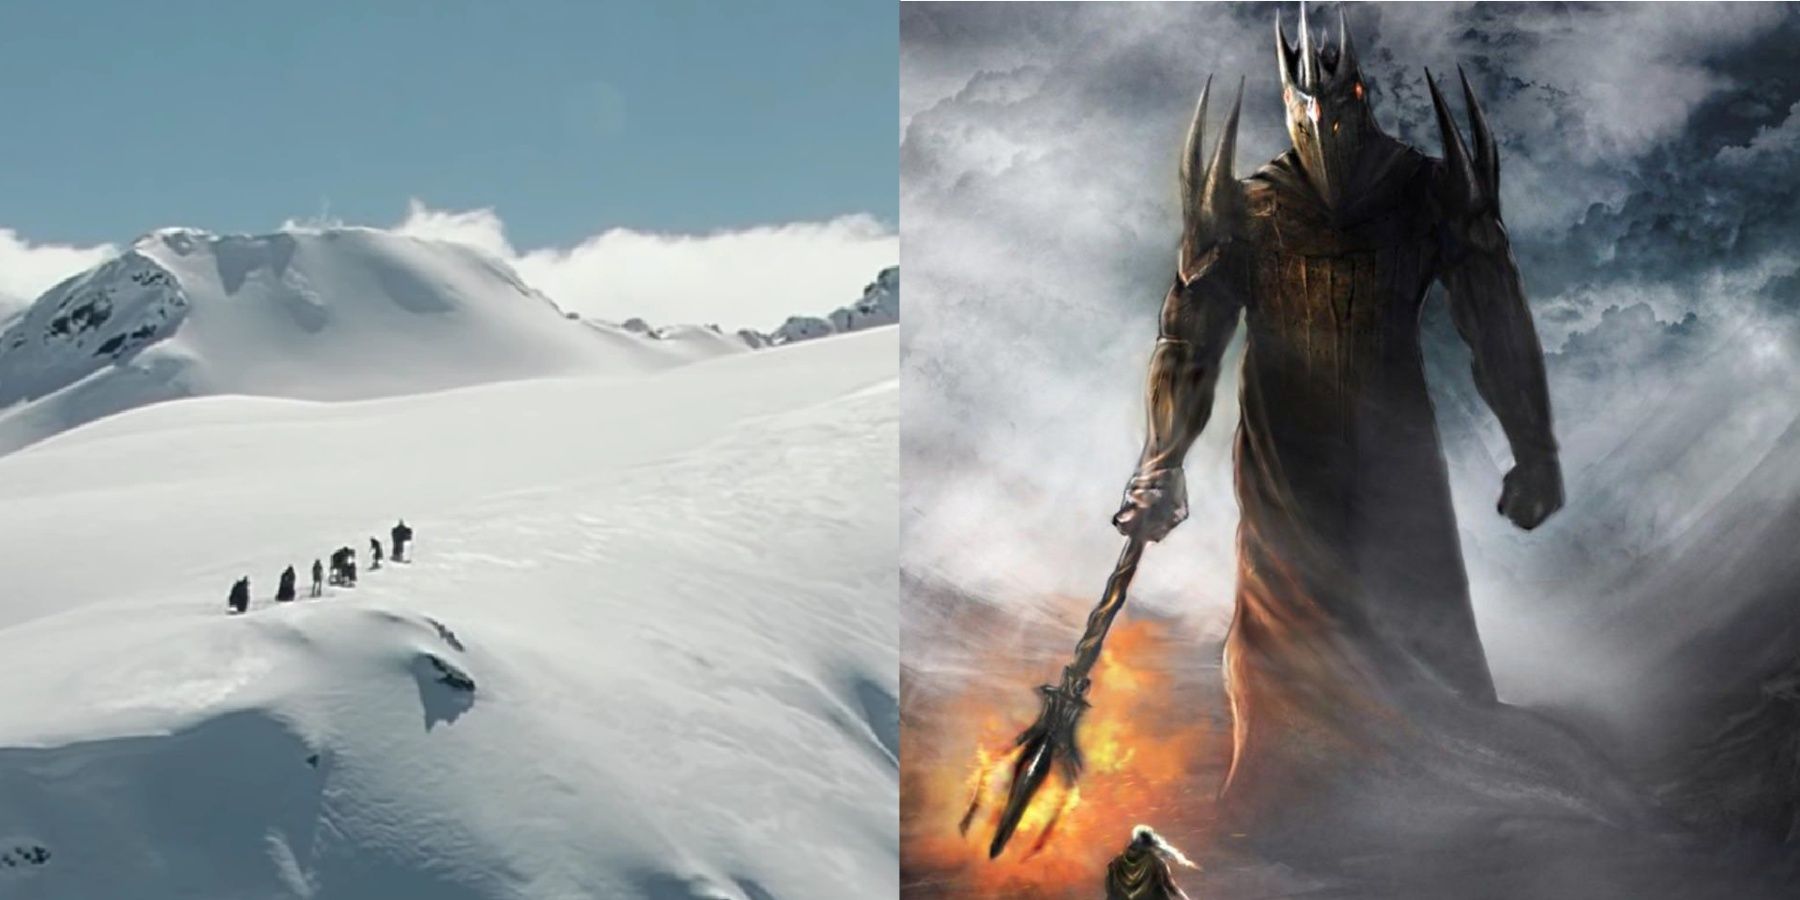 LOTR: Did Morgoth Create The Misty Mountains?